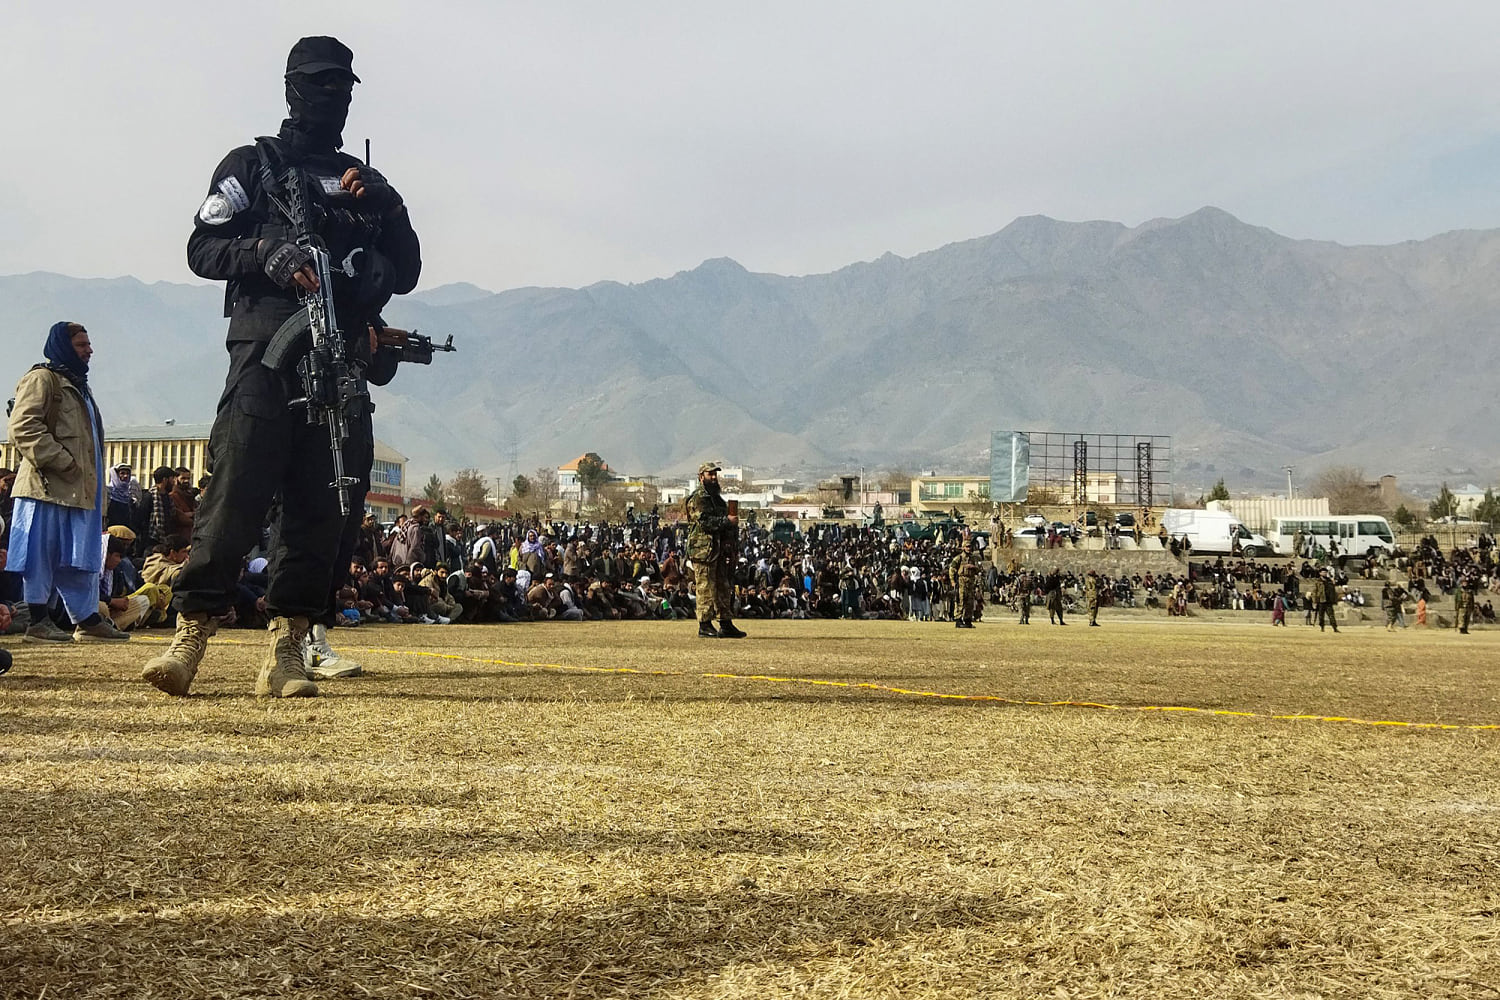 Taliban publicly flogs 63 people accused of crimes, including women